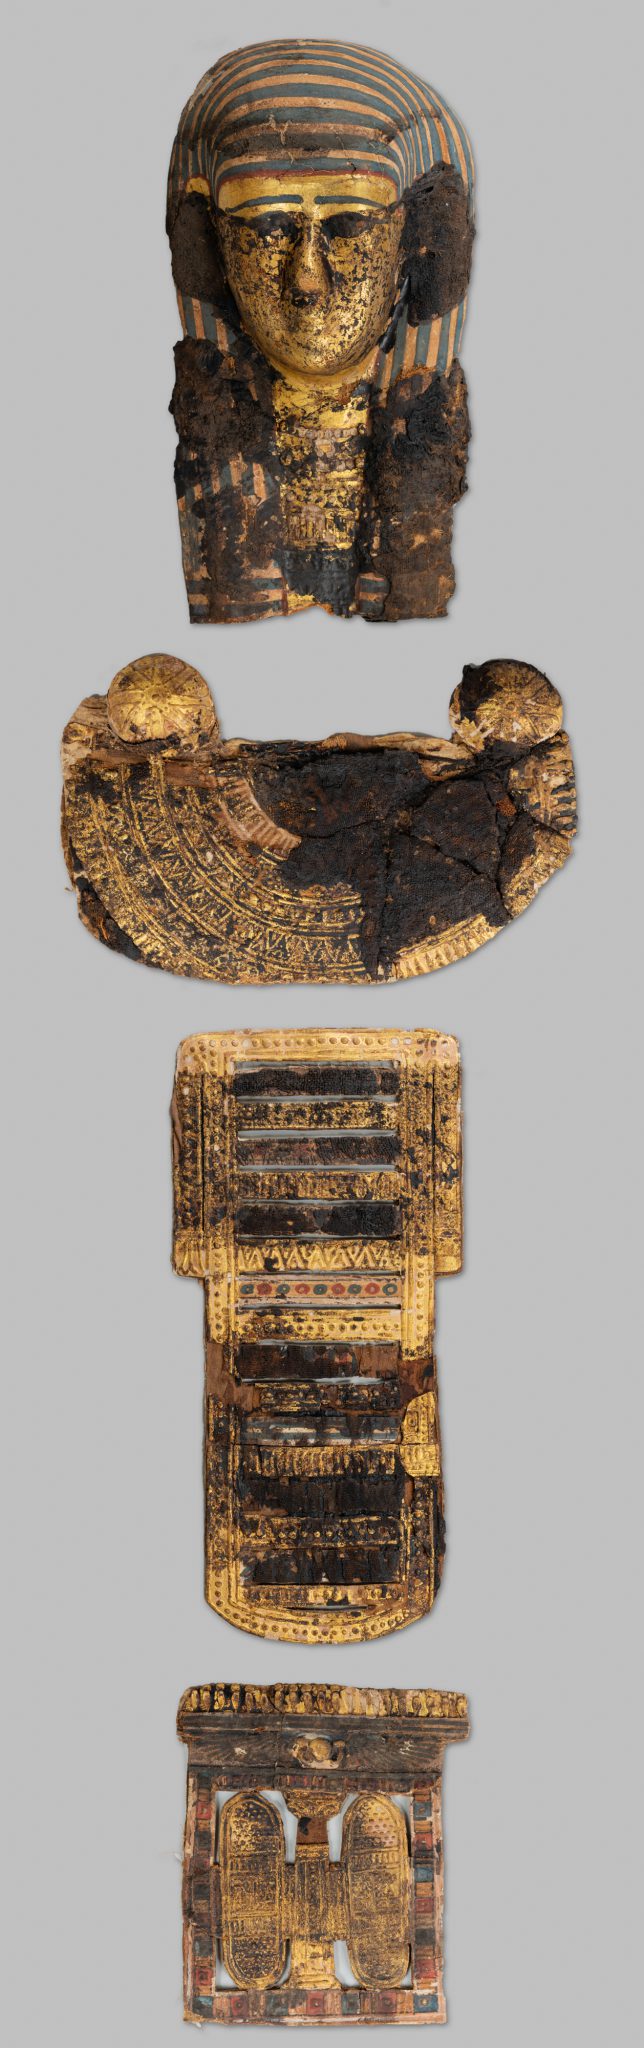 Four sculptural fragments including a mummy mask and three panels with intricate carvings and patterns in gold leaf.